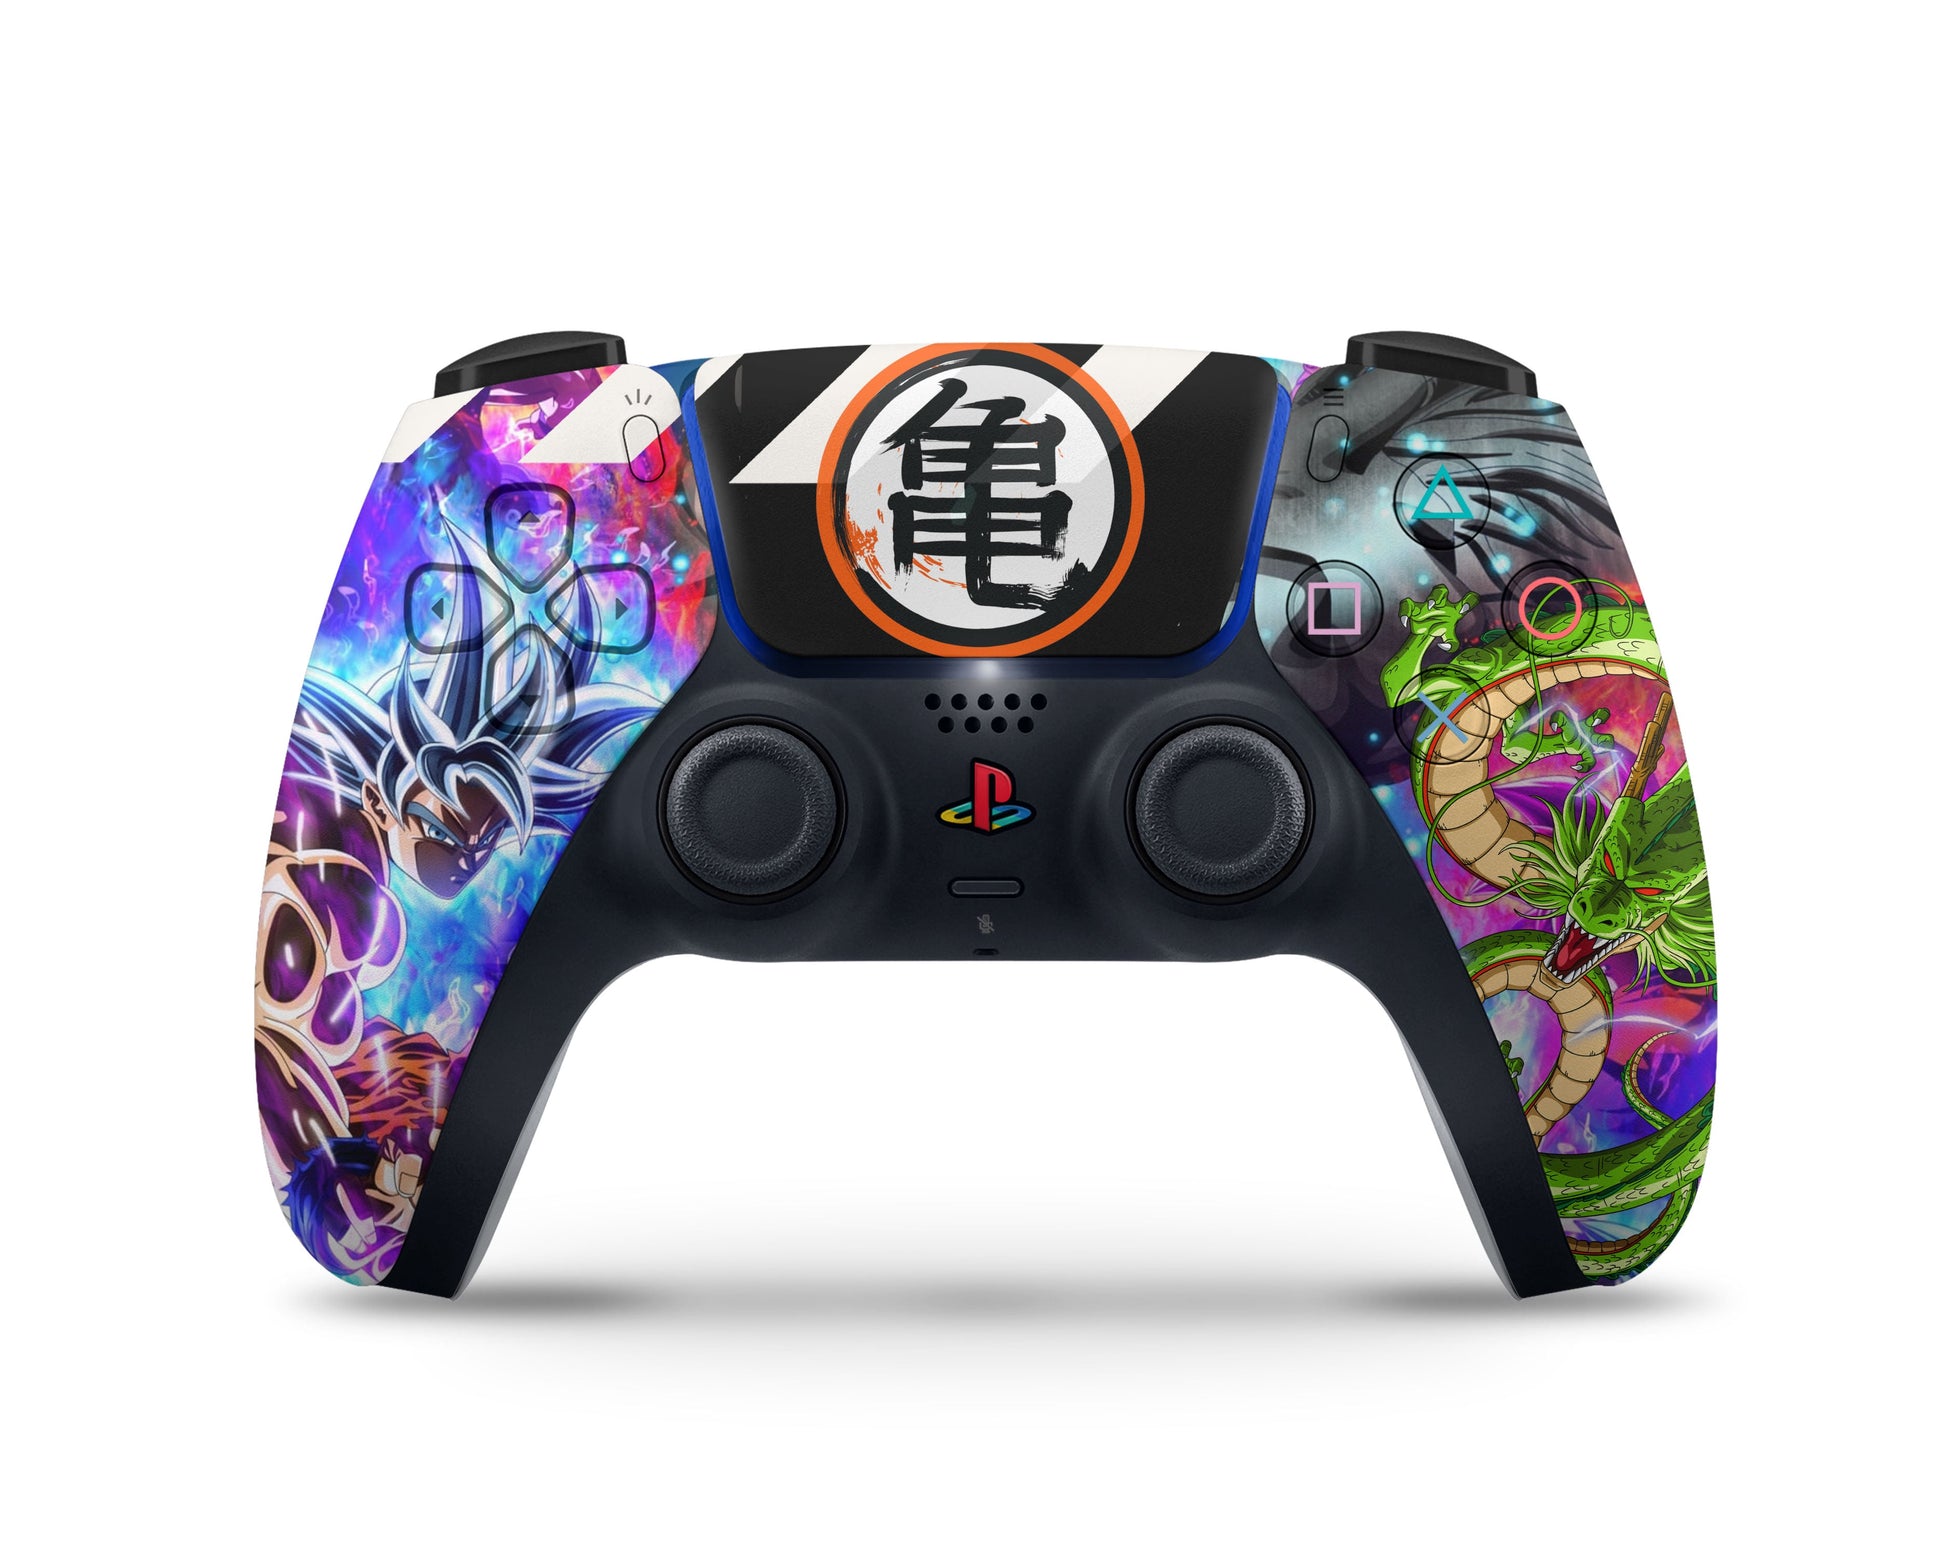 Cool Ps5 Featuresdragon Ball Ps5 Console & Controller Skin